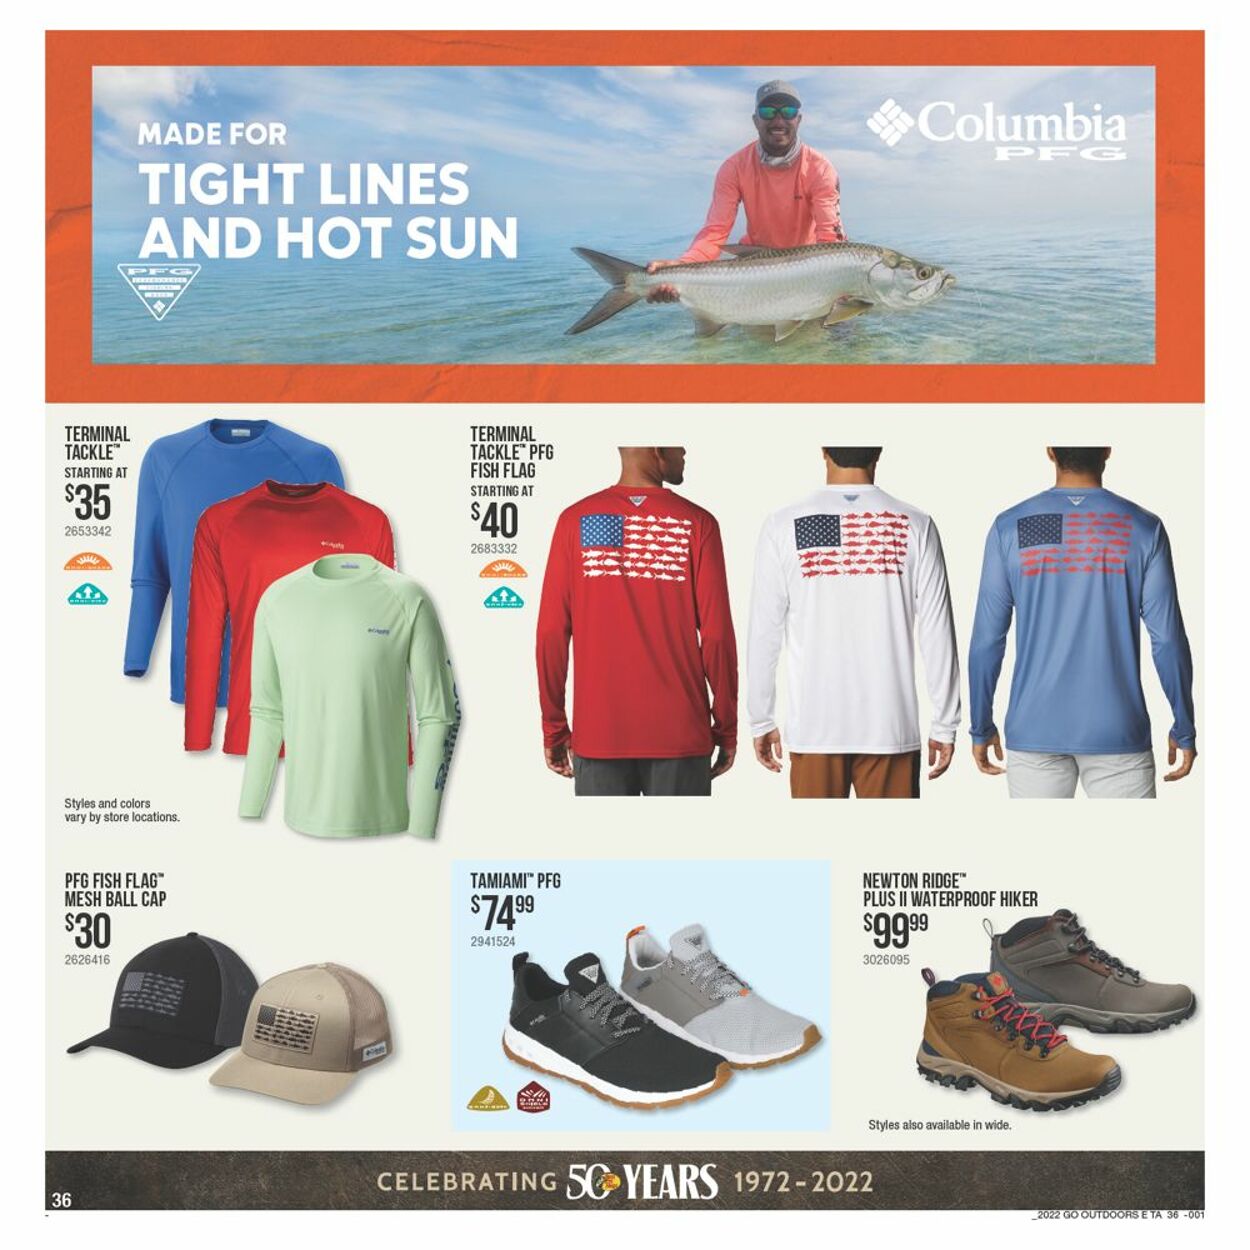 Weekly ad Cabela's 05/13/2022 - 06/02/2022